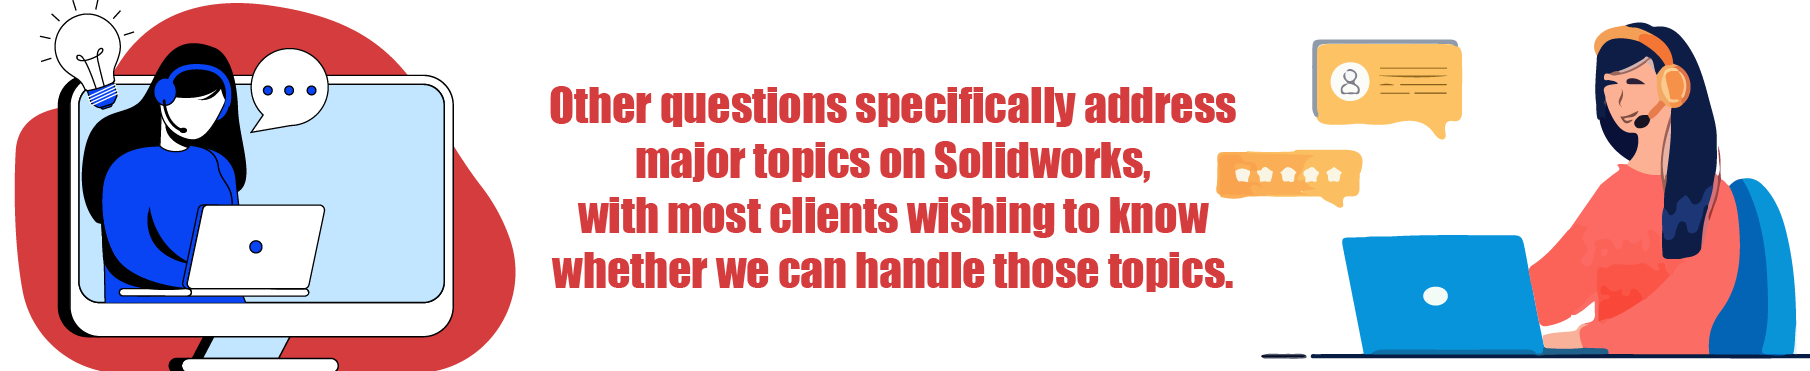 Solidworks Project Helpers Banner 5